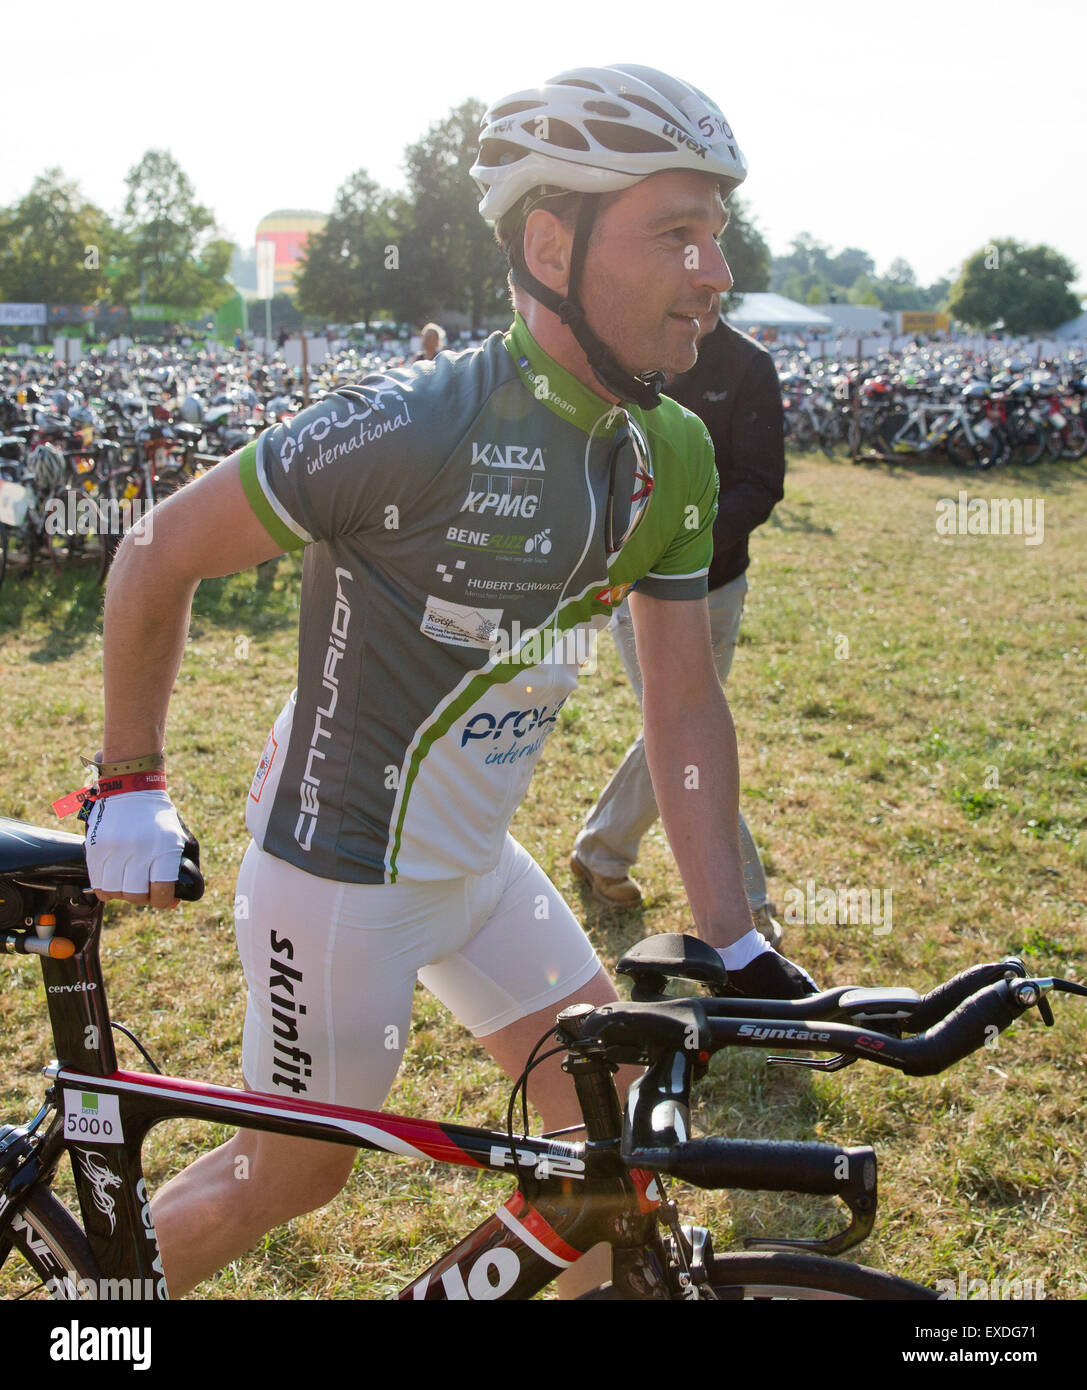 Hilpoltstein, Germany. 12th July, 2015. Heiko Maas (SPD), German Minister of Justice, before the cycling stage at the Datev Challenge Roth in Hilpoltstein, Germany, 12 July 2015. According to the organizers of the triathlon, the minister participated in the cycling stage just for fun. The participants of the 14th edition of the Datev Challenge Roth triathlon have to complete the ironman distance of 3, 8 km swimming, 180 km cycling and a marathon. Photo. DANIEL KARMANN/dpa/Alamy Live News Stock Photo